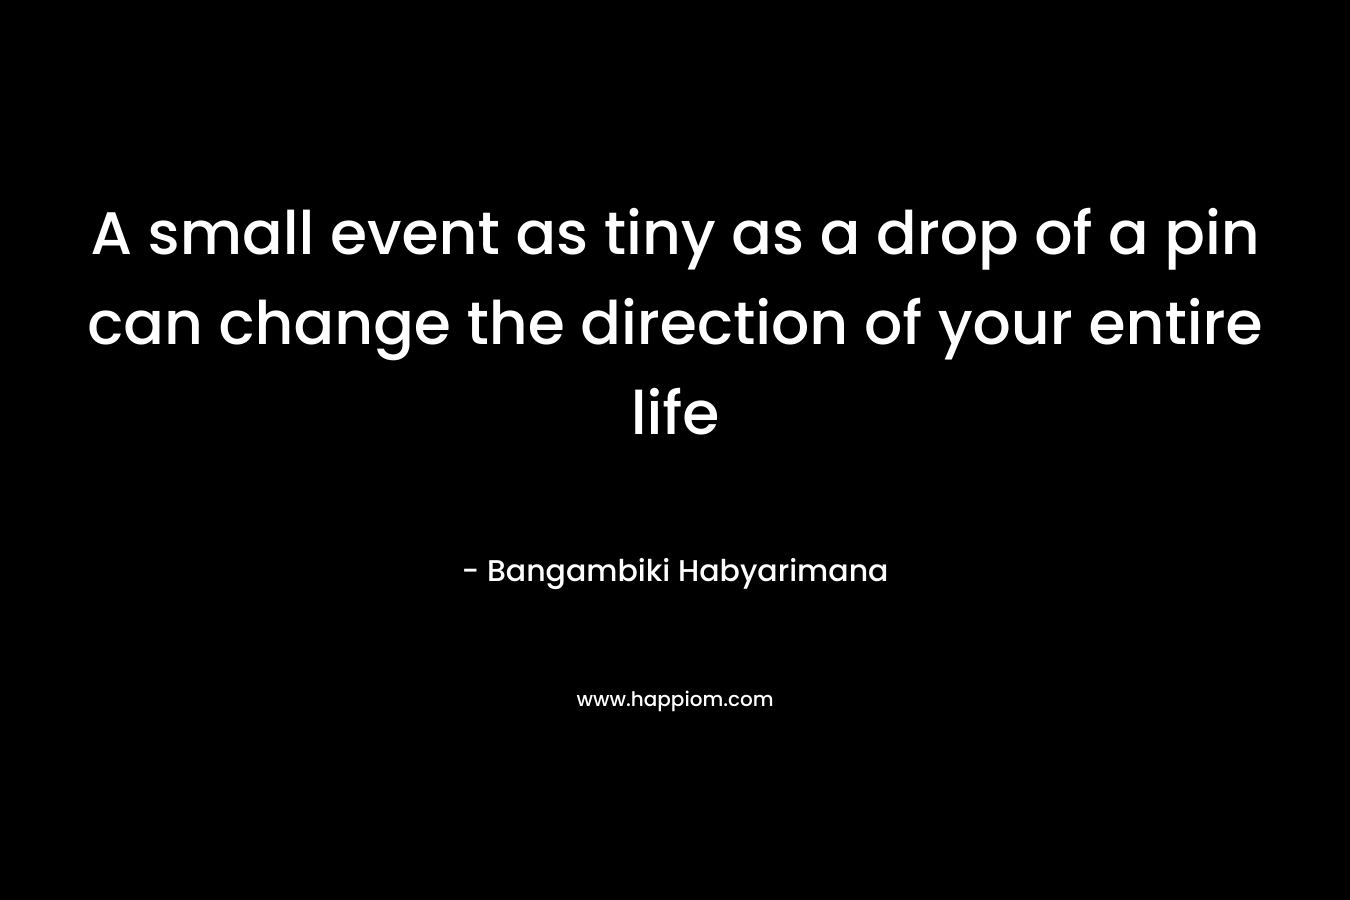 A small event as tiny as a drop of a pin can change the direction of your entire life